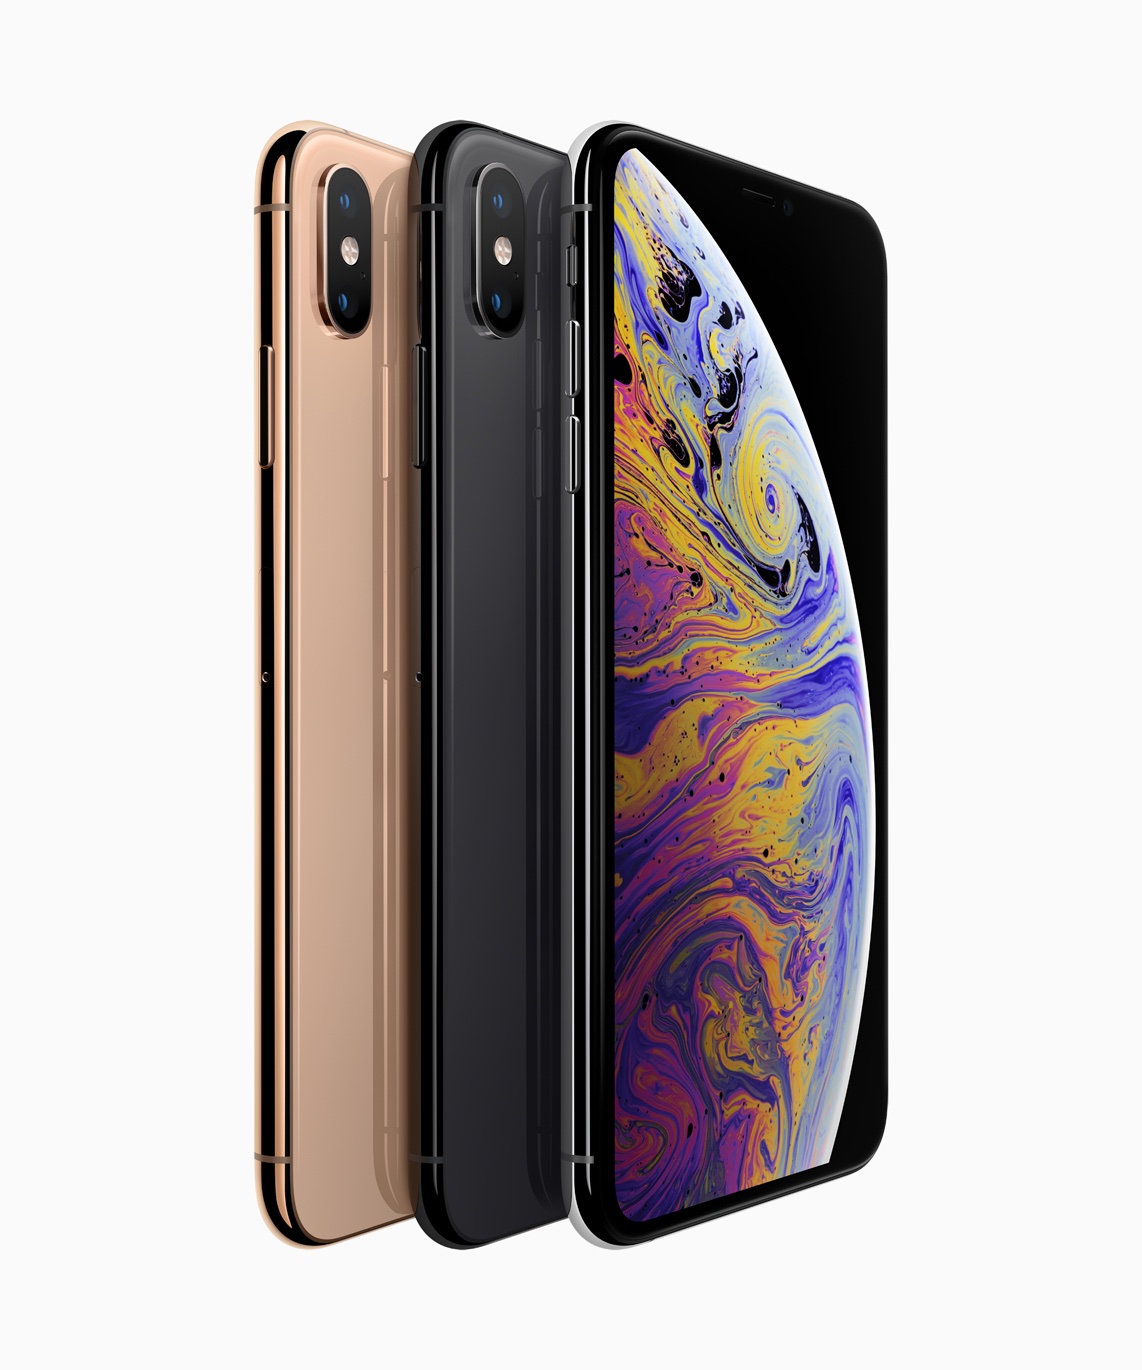 iPhone Xs and iPhone Xs Max available for order this Friday